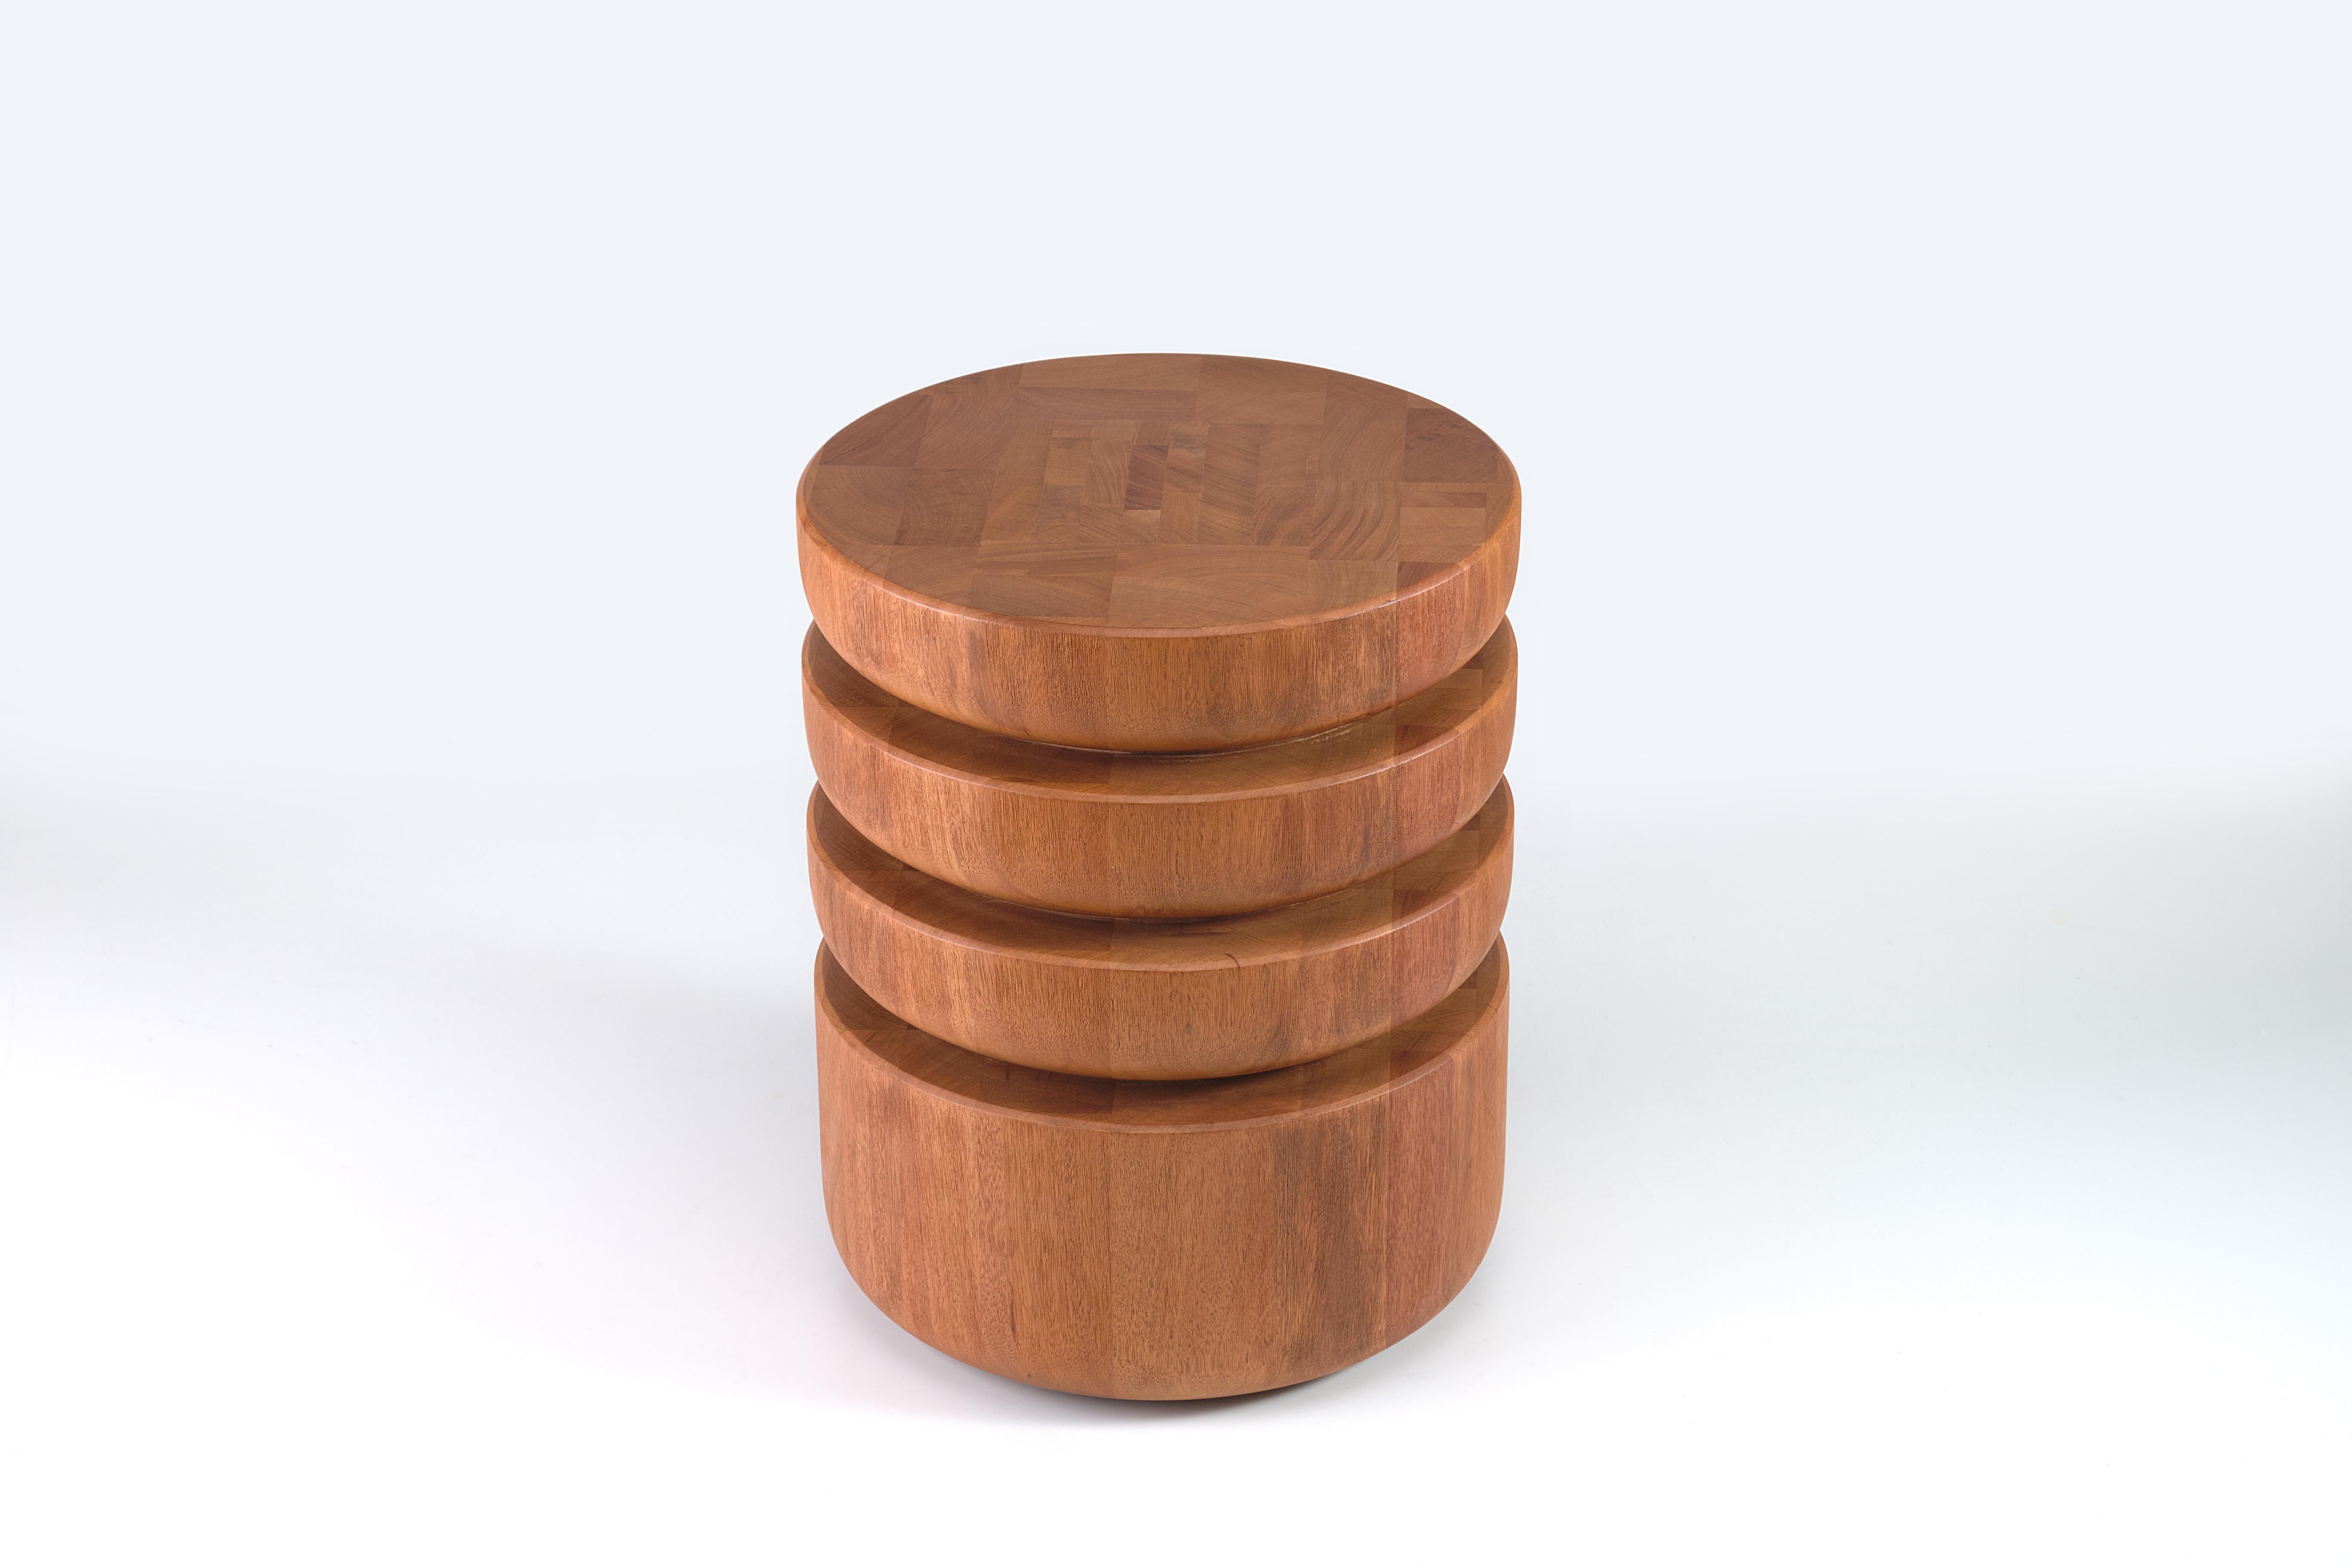 This contemporary table body is made out of a single turned tree trunk, with natural finish.